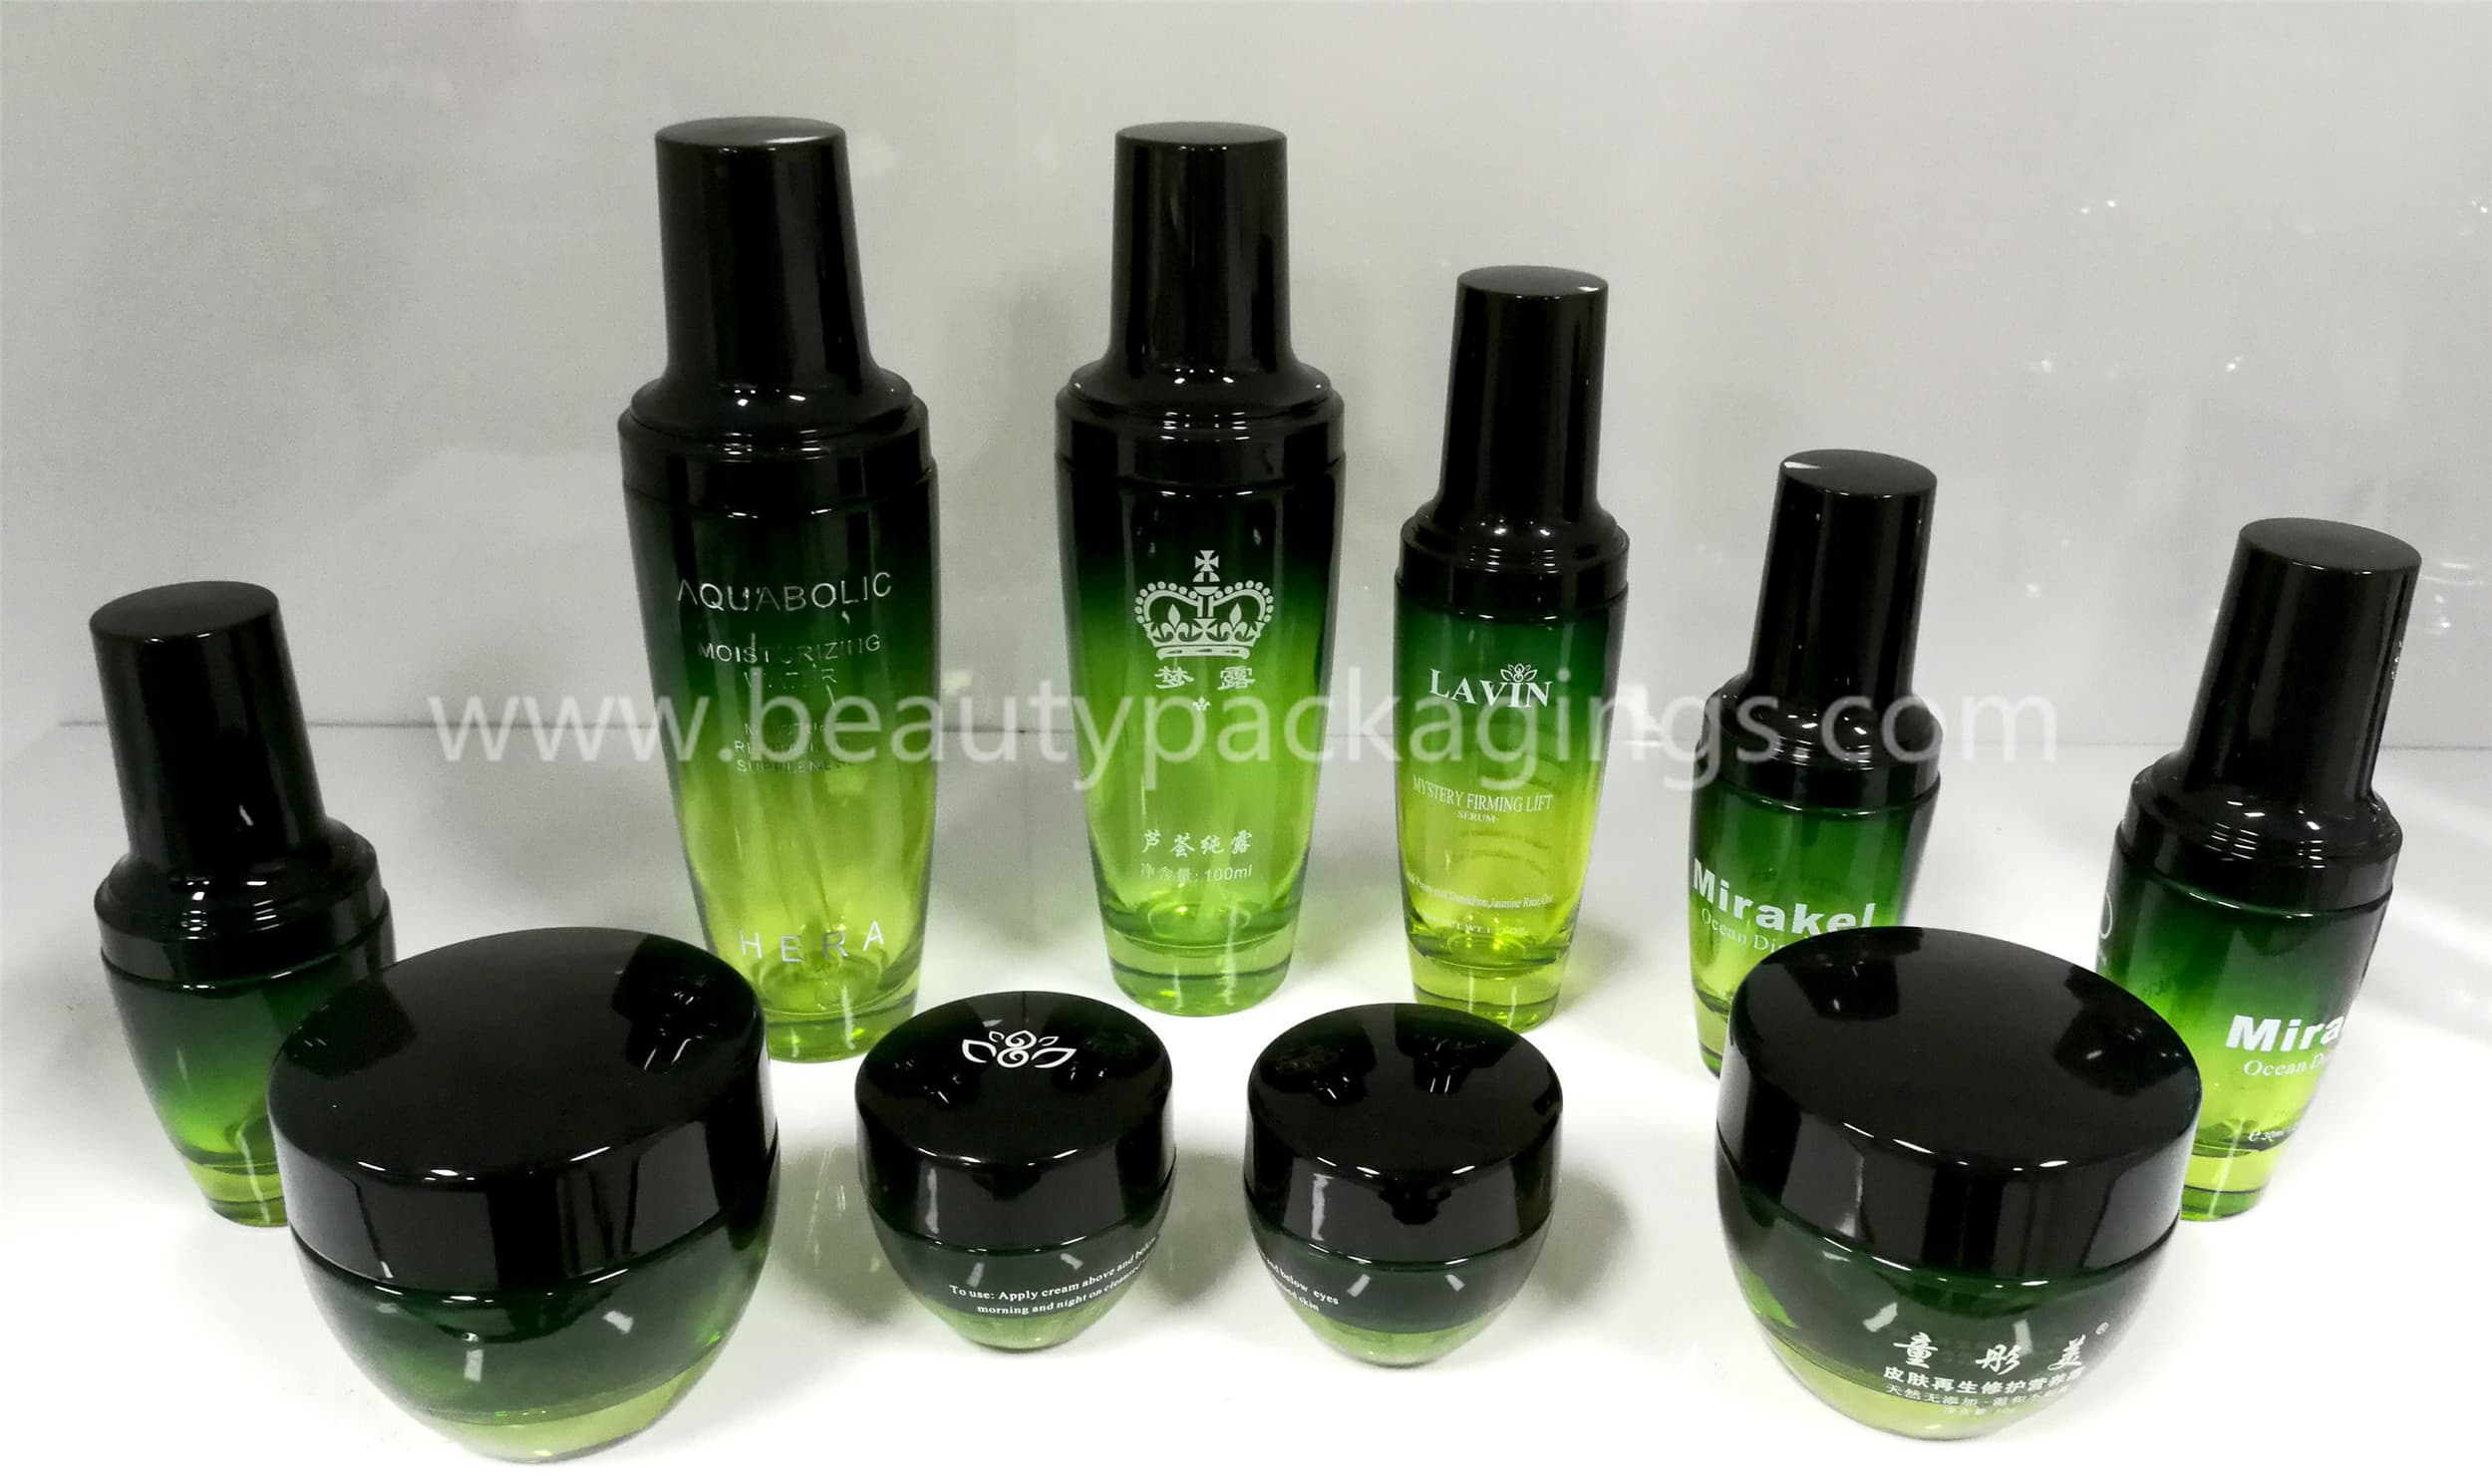 Black_green Color Serum Cosmetic Bottle And Cream Jars